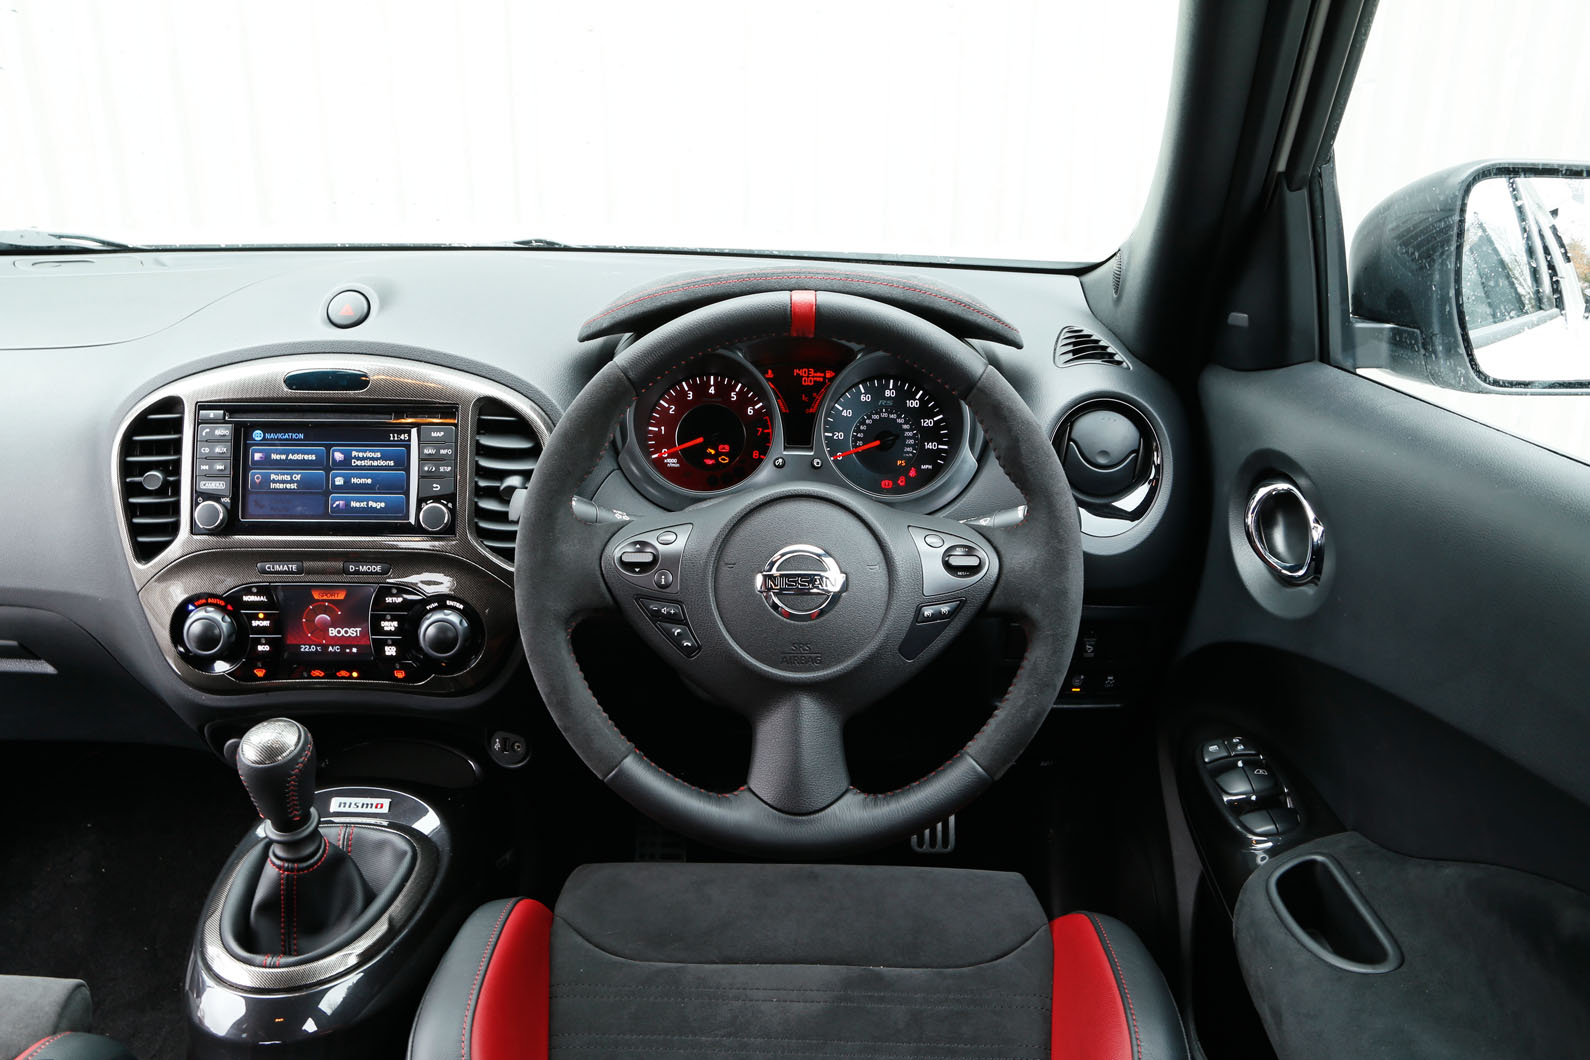 From the driver's perspective in the Nissan Juke Nismo RS